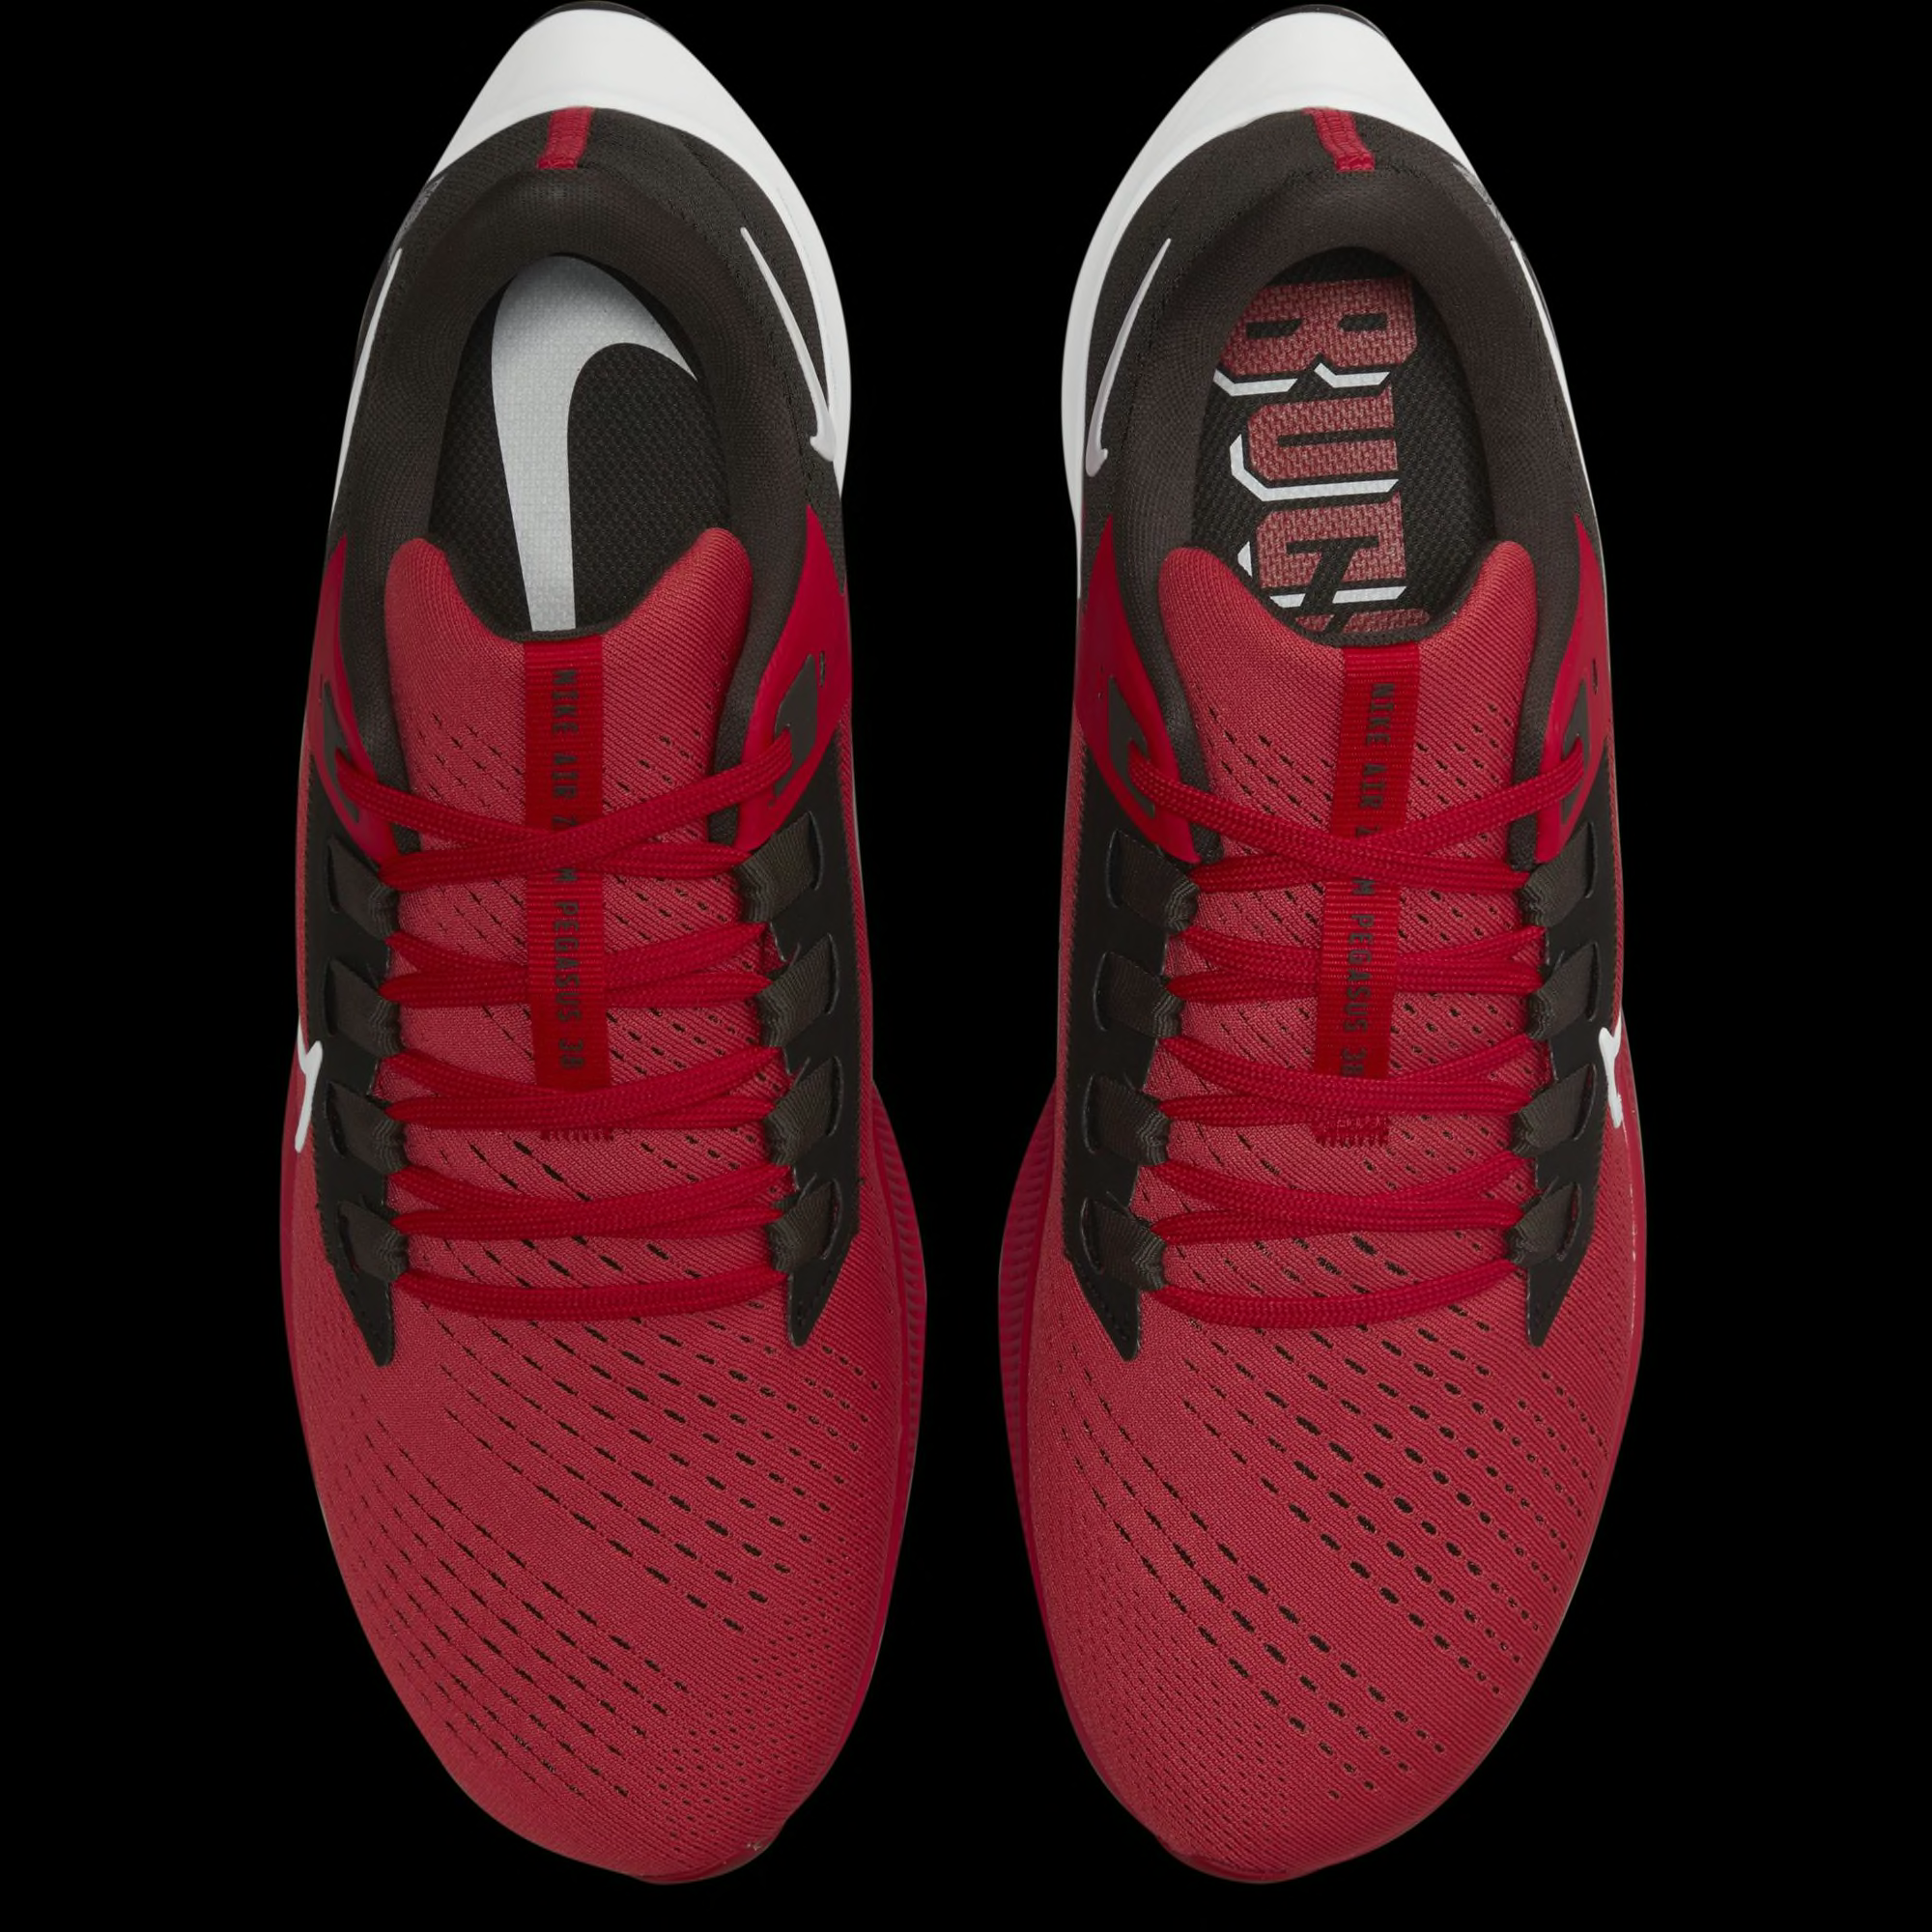 Order your Tampa Bay Buccaneers Nike Air Zoom shoes today